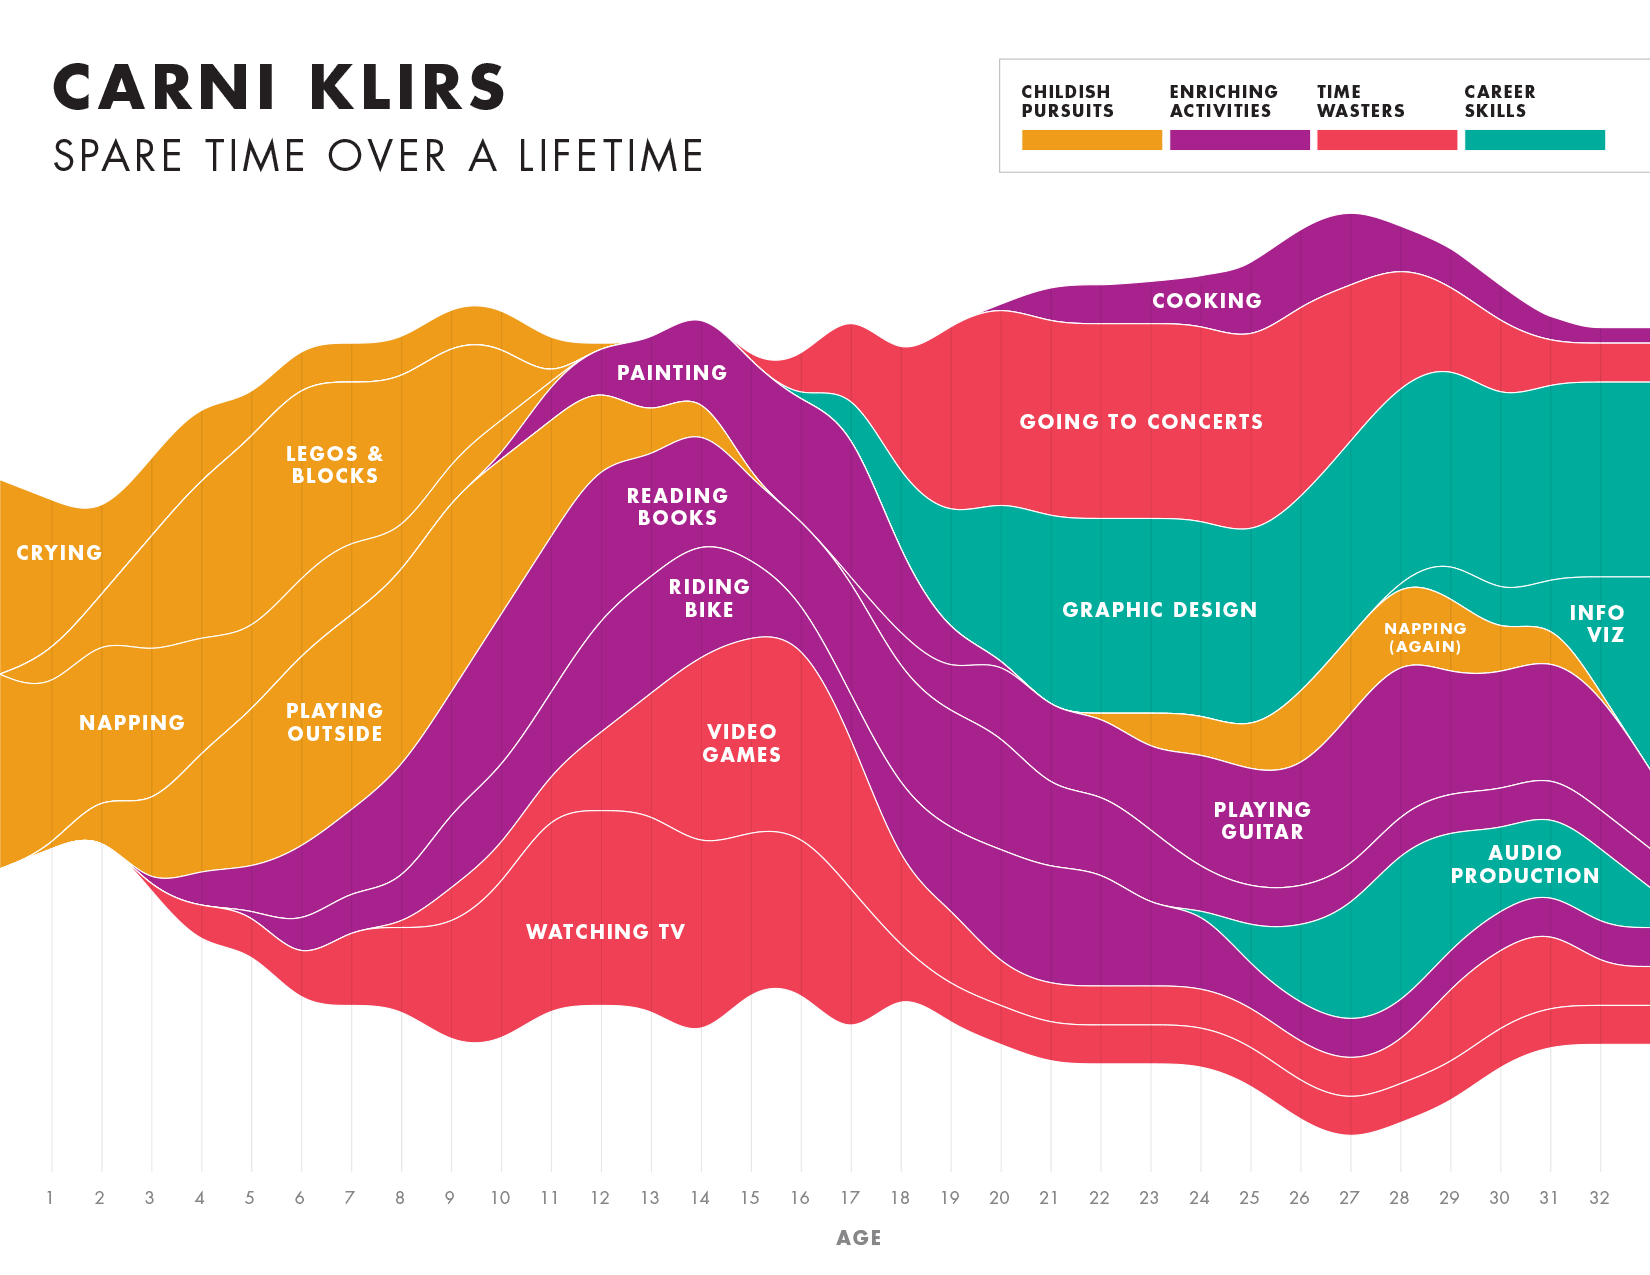 Streamgraph of leisure activities over the last 30 years